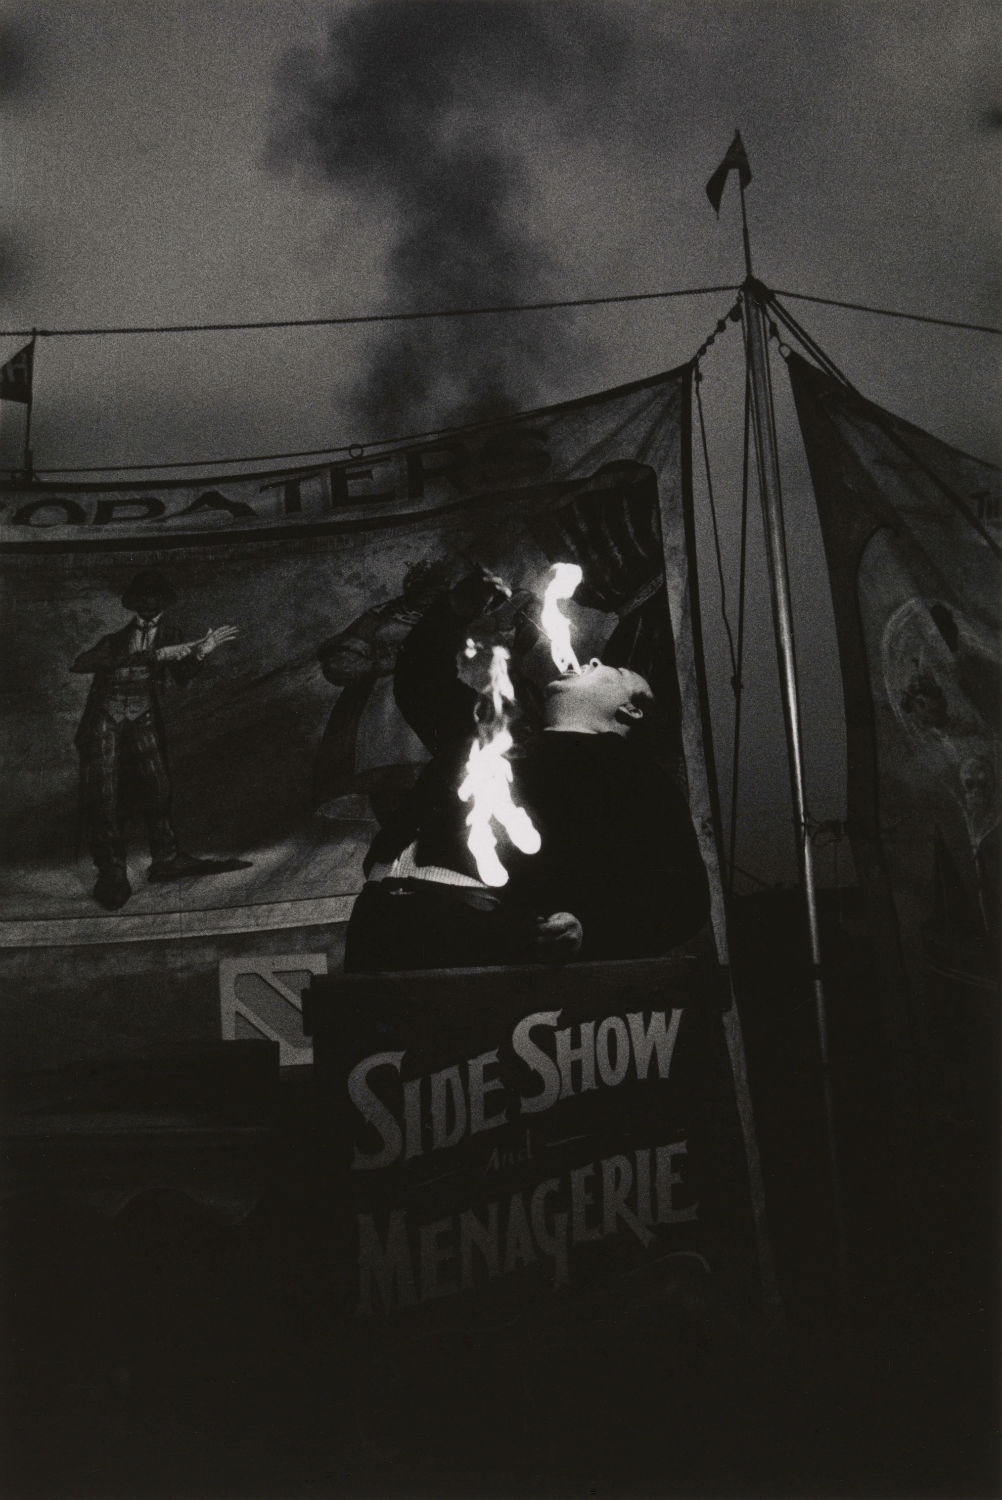 Fire Eater at a carnival, Palisades Park, N.J. 1957